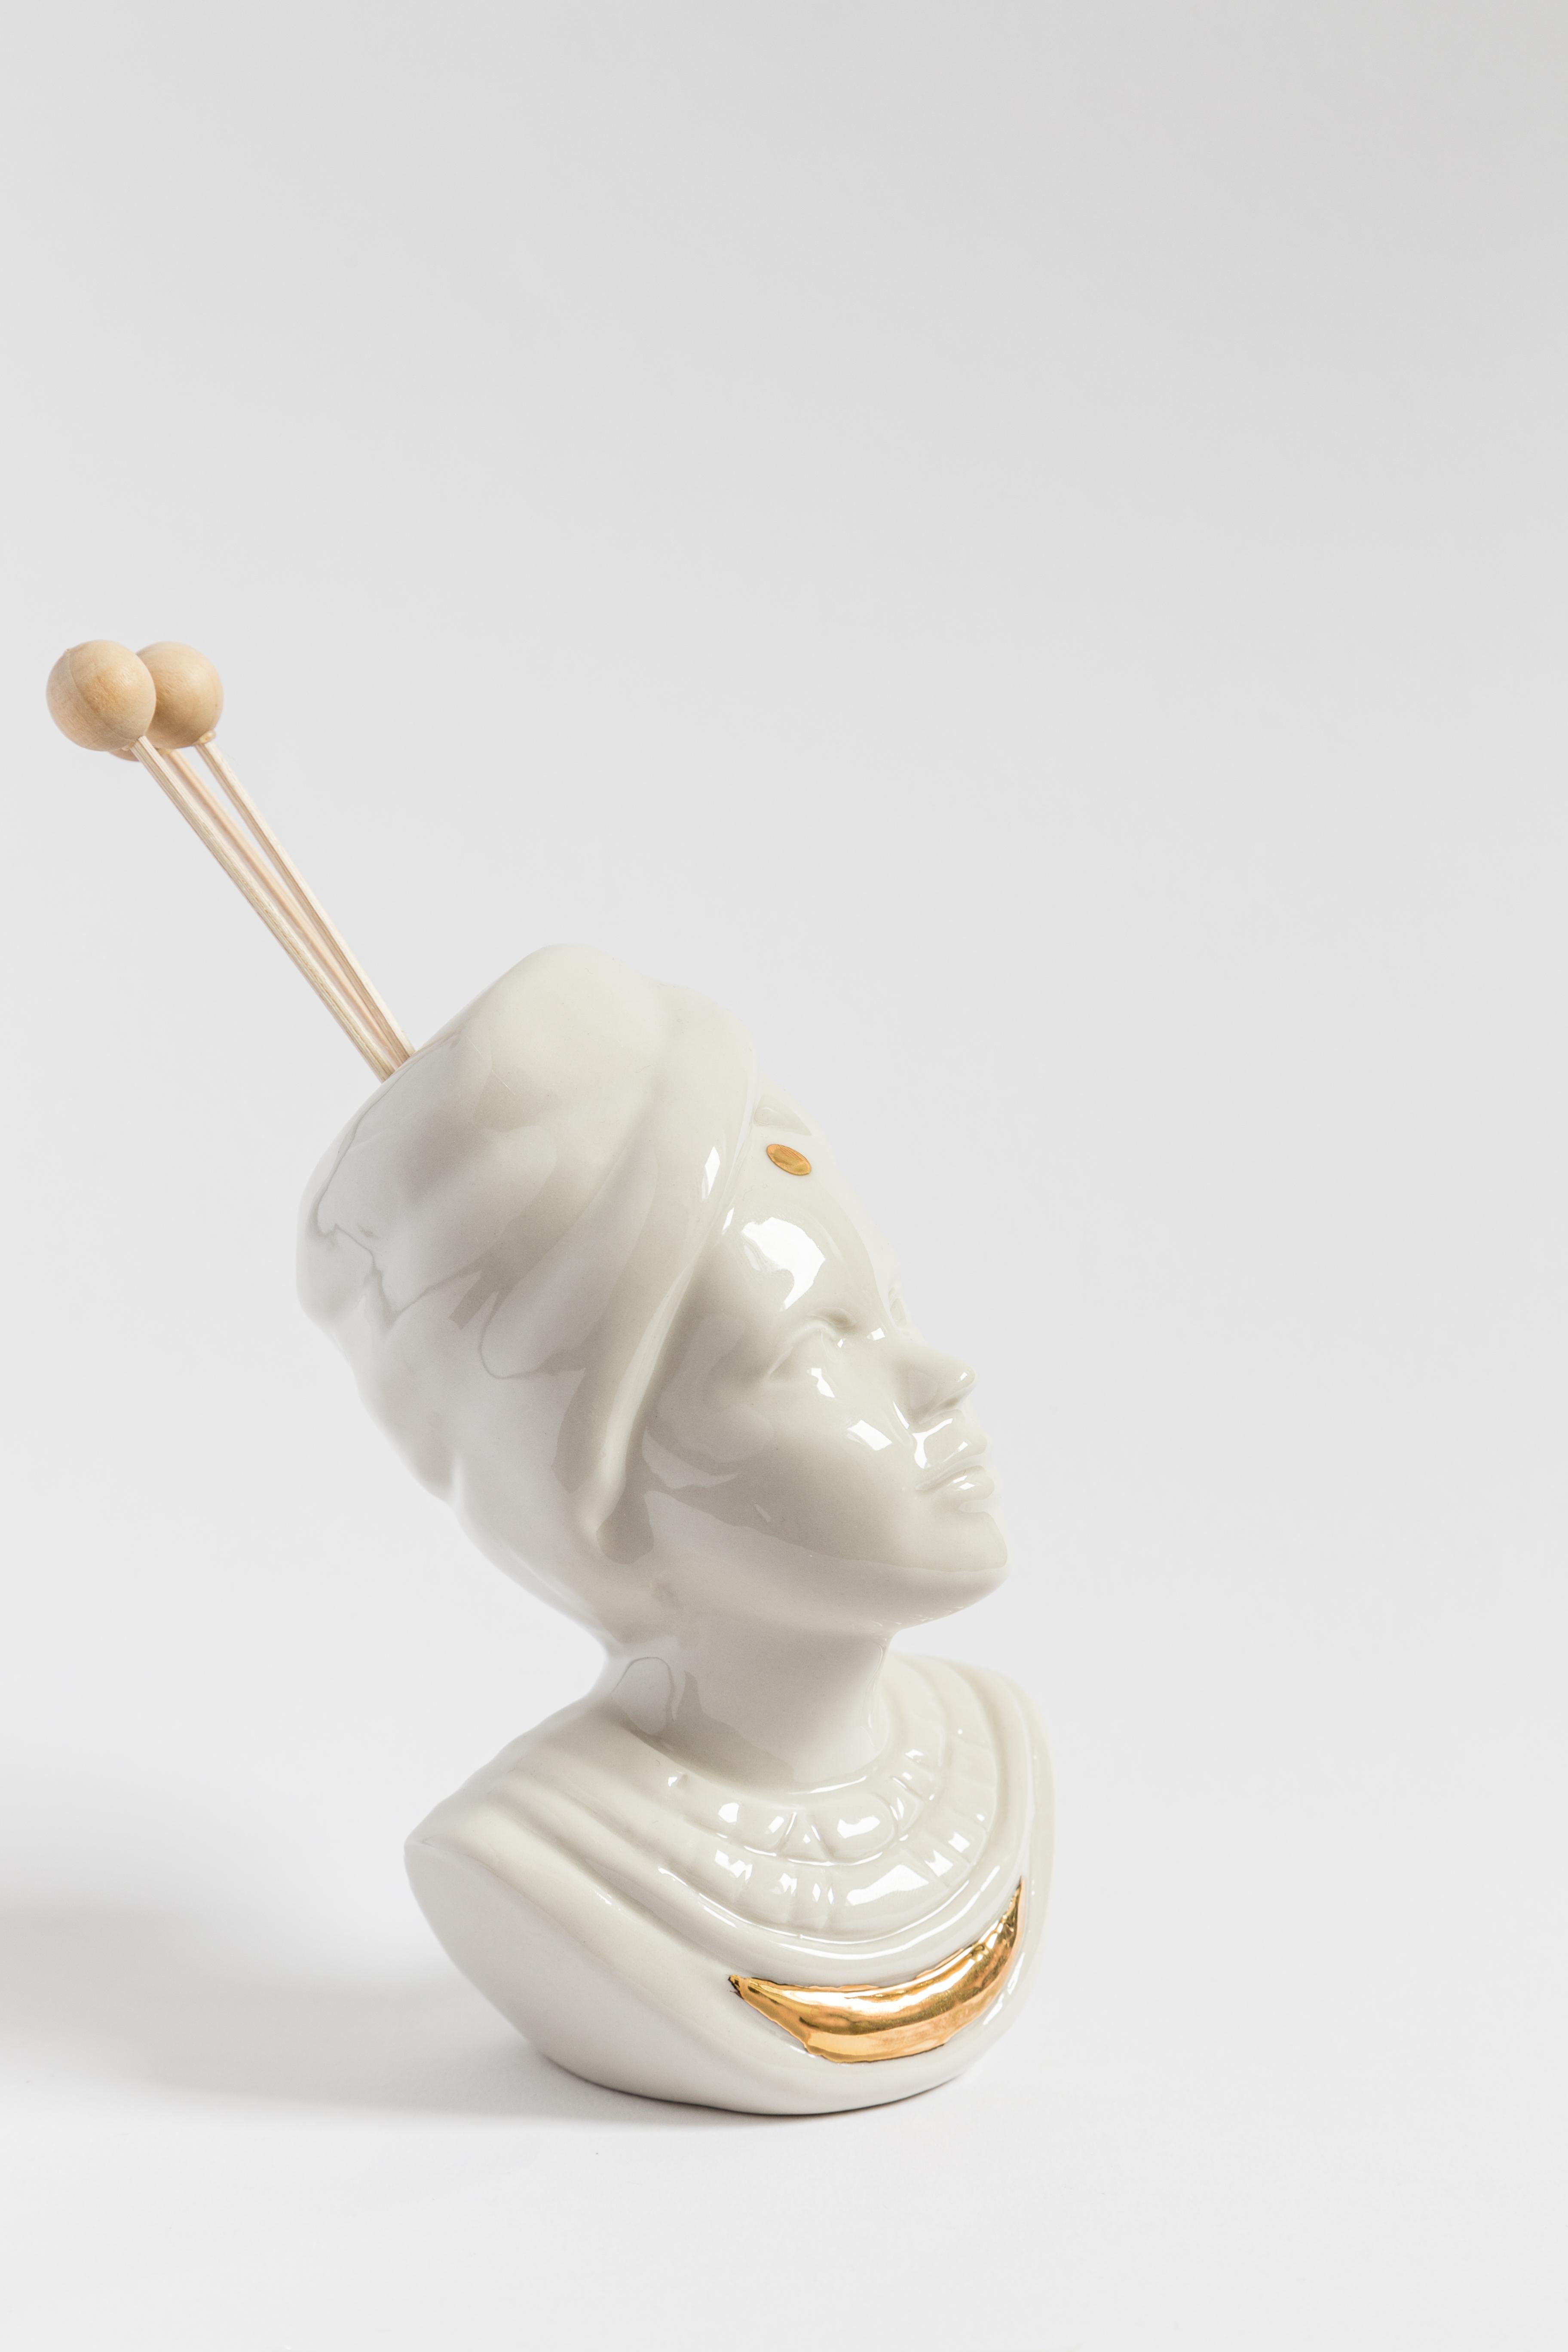 This Italian porcelain sculpture is part of Grand Tour by Vito Nesta. Made in Capodimonte porcelain with a glossy finish and gold detail, this sculpture is an essential oil diffuser and is shaped like an Indian woman.